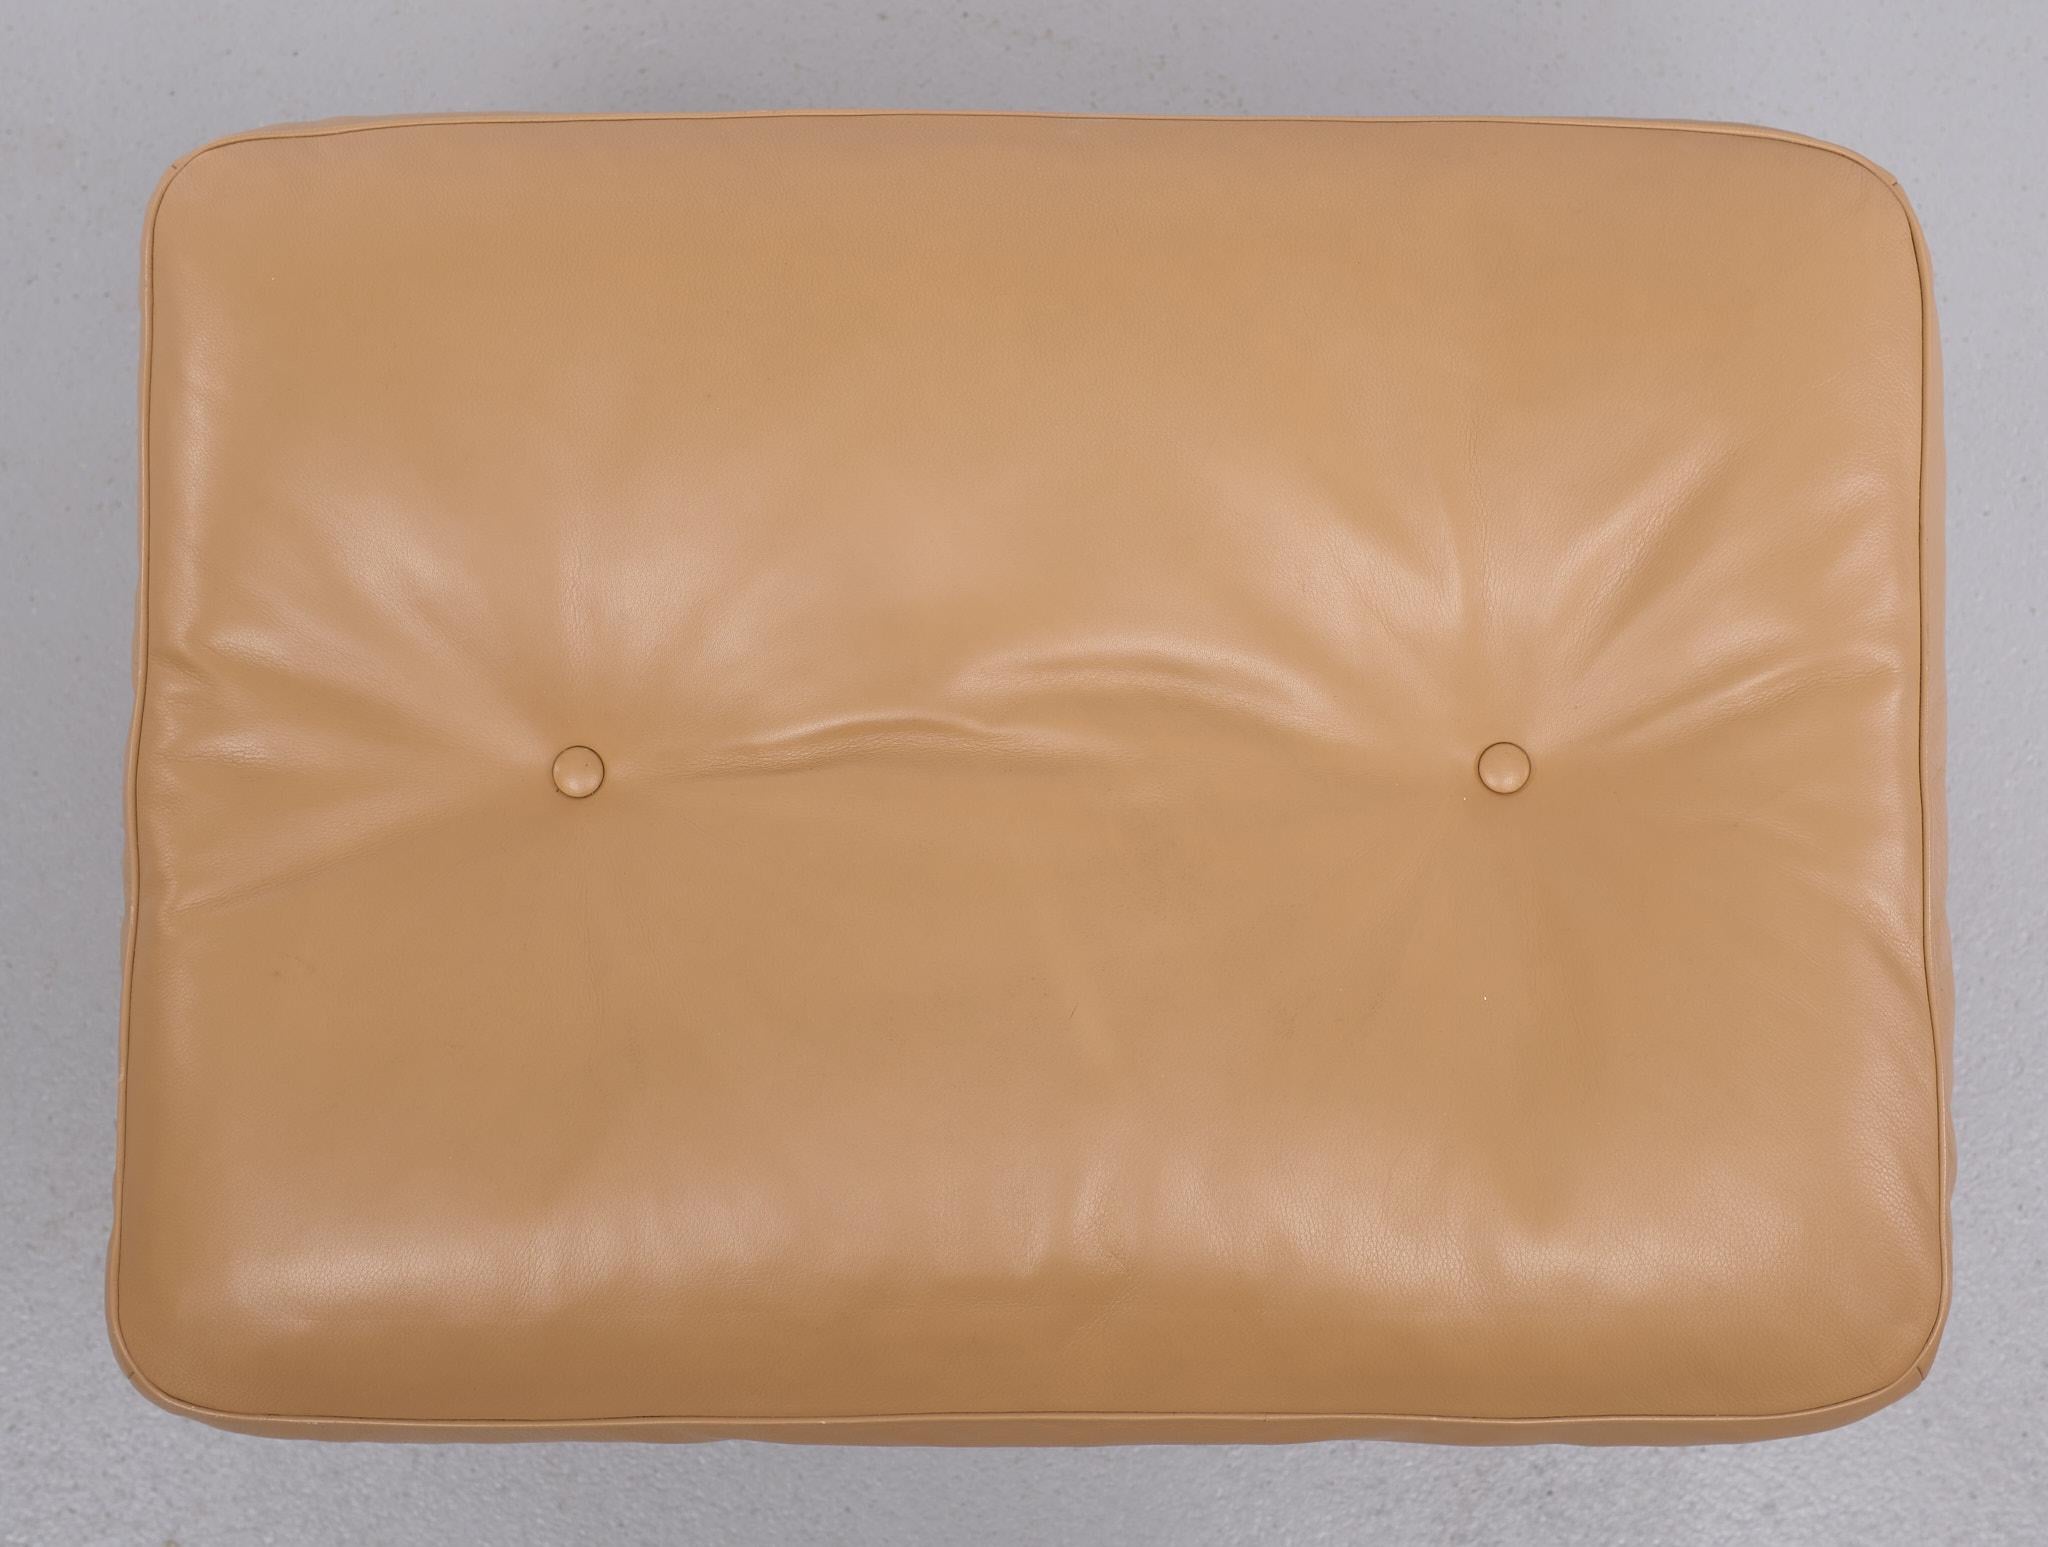 Poltrona Frau Leather Ottoman 1975 Italy In Good Condition For Sale In Den Haag, NL